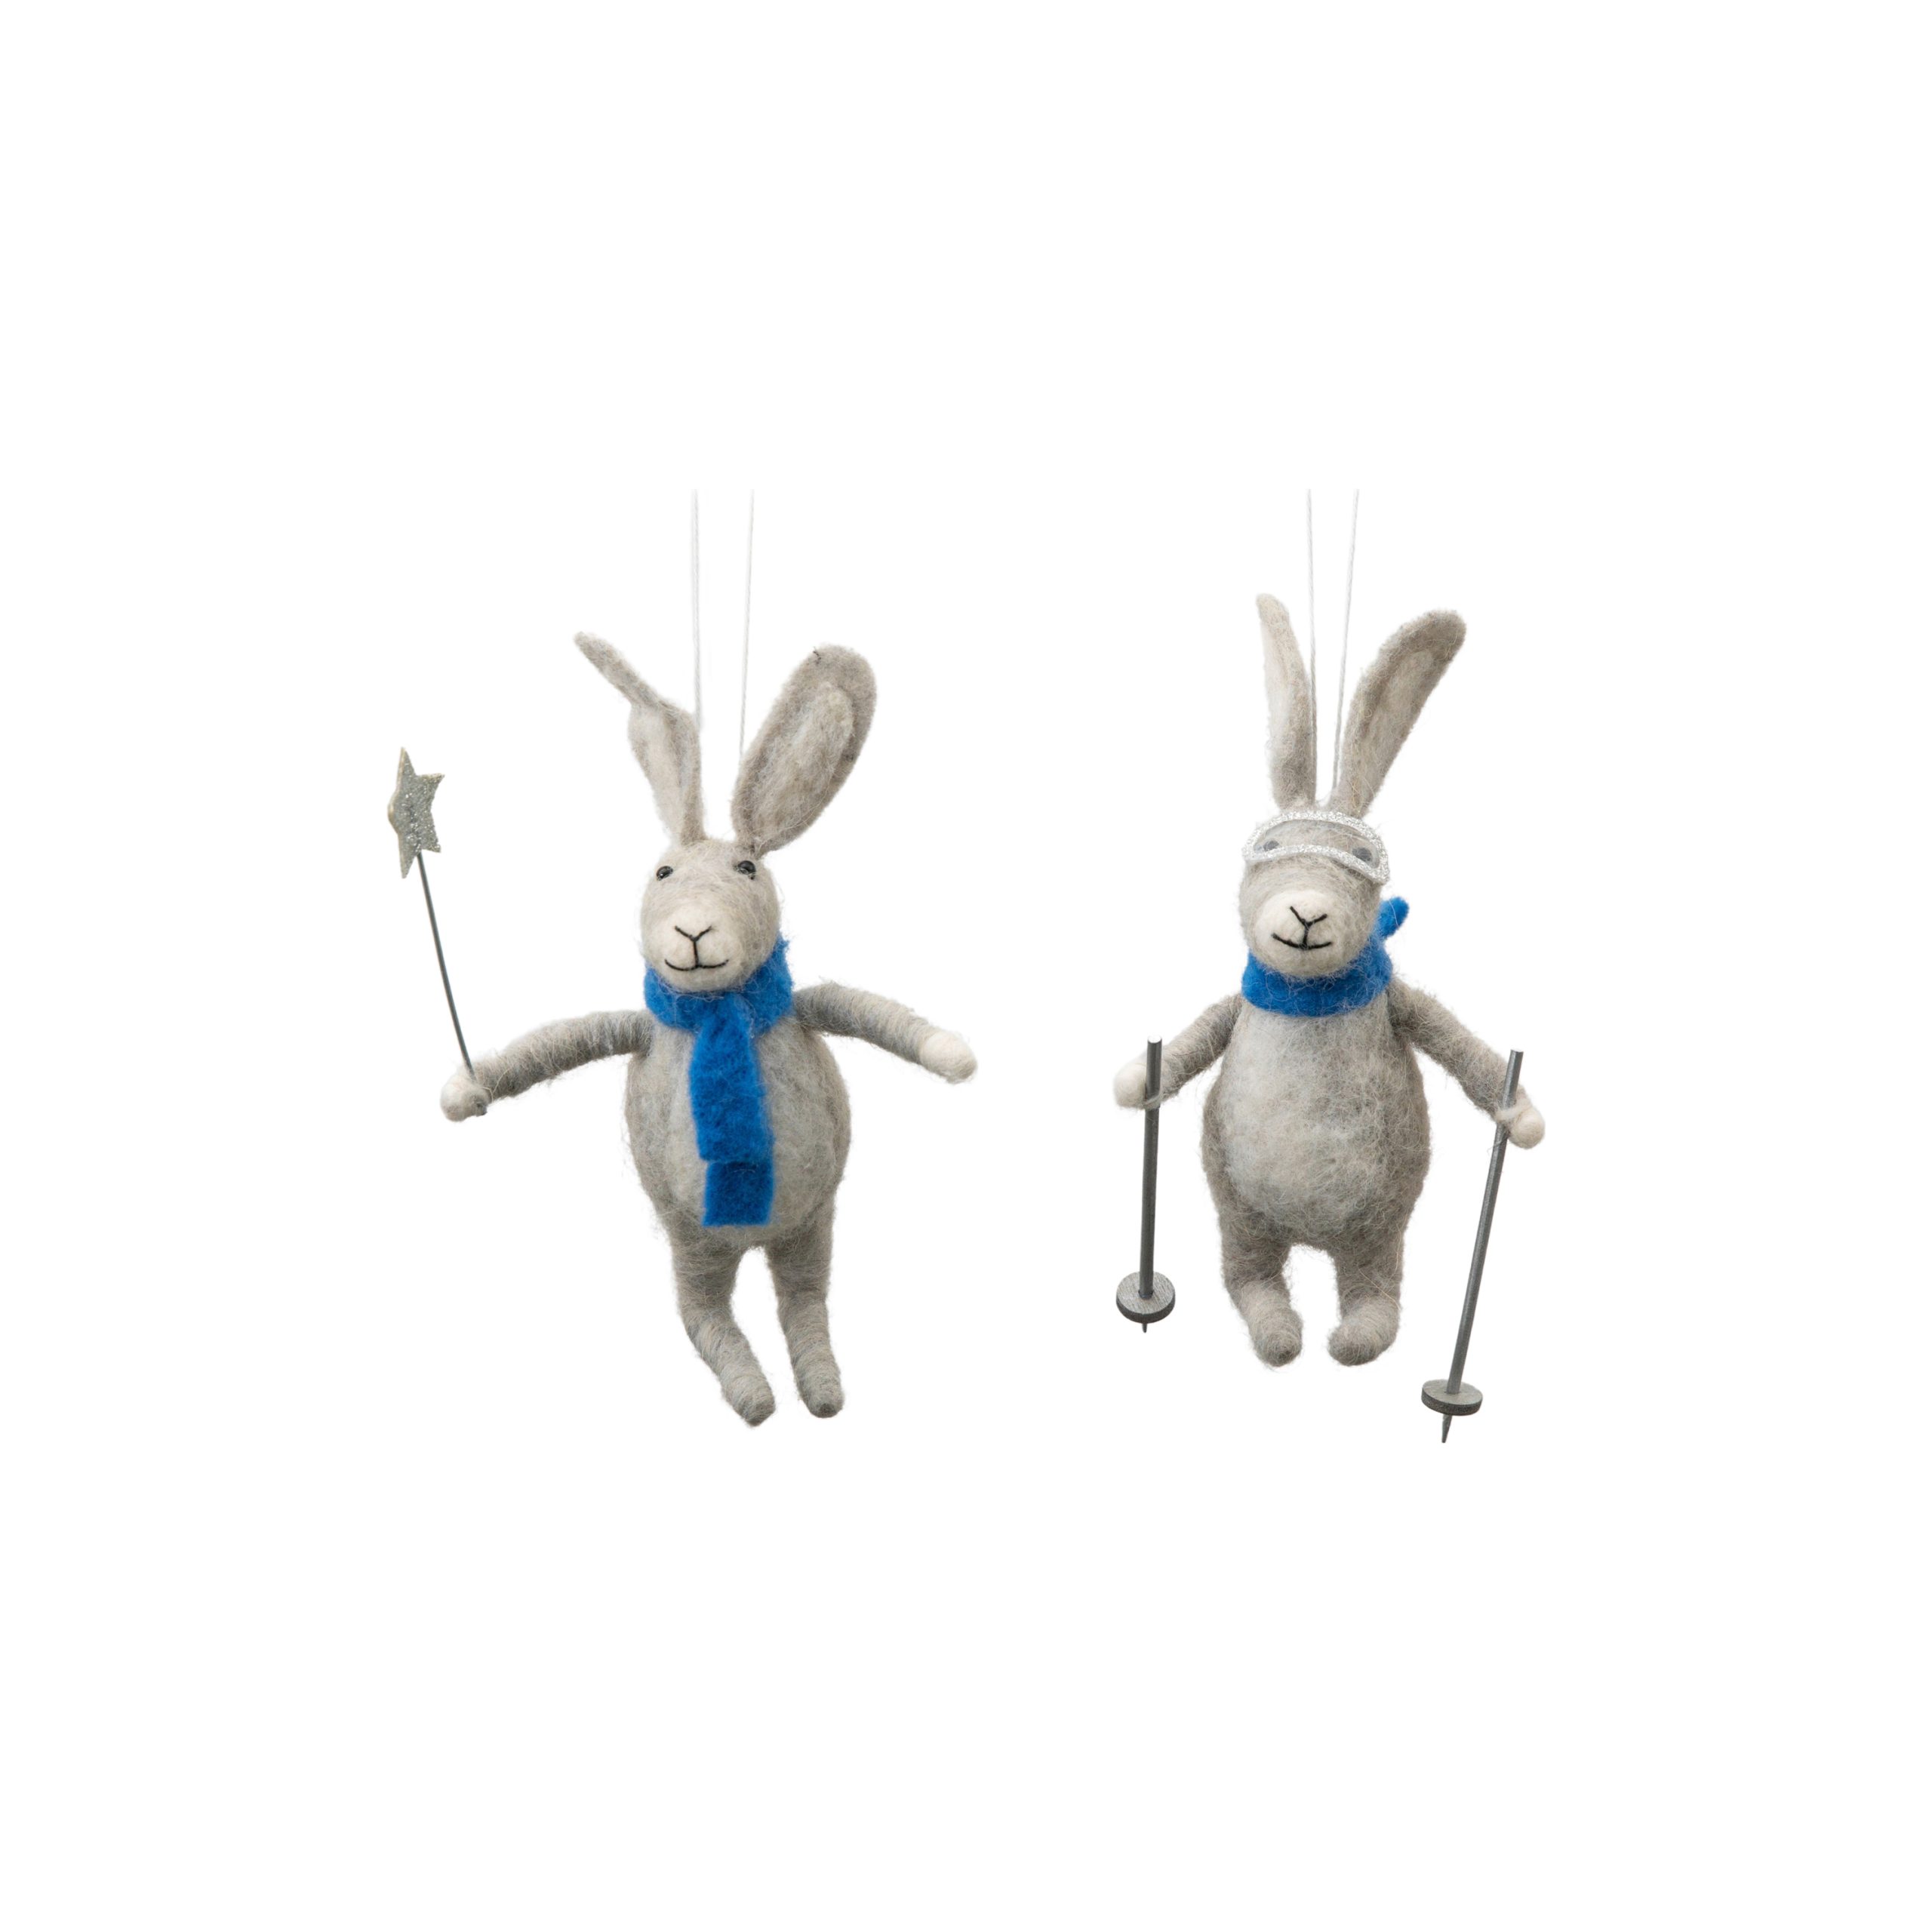 Gallery Direct Skiing Hares Grey (Set of 2)